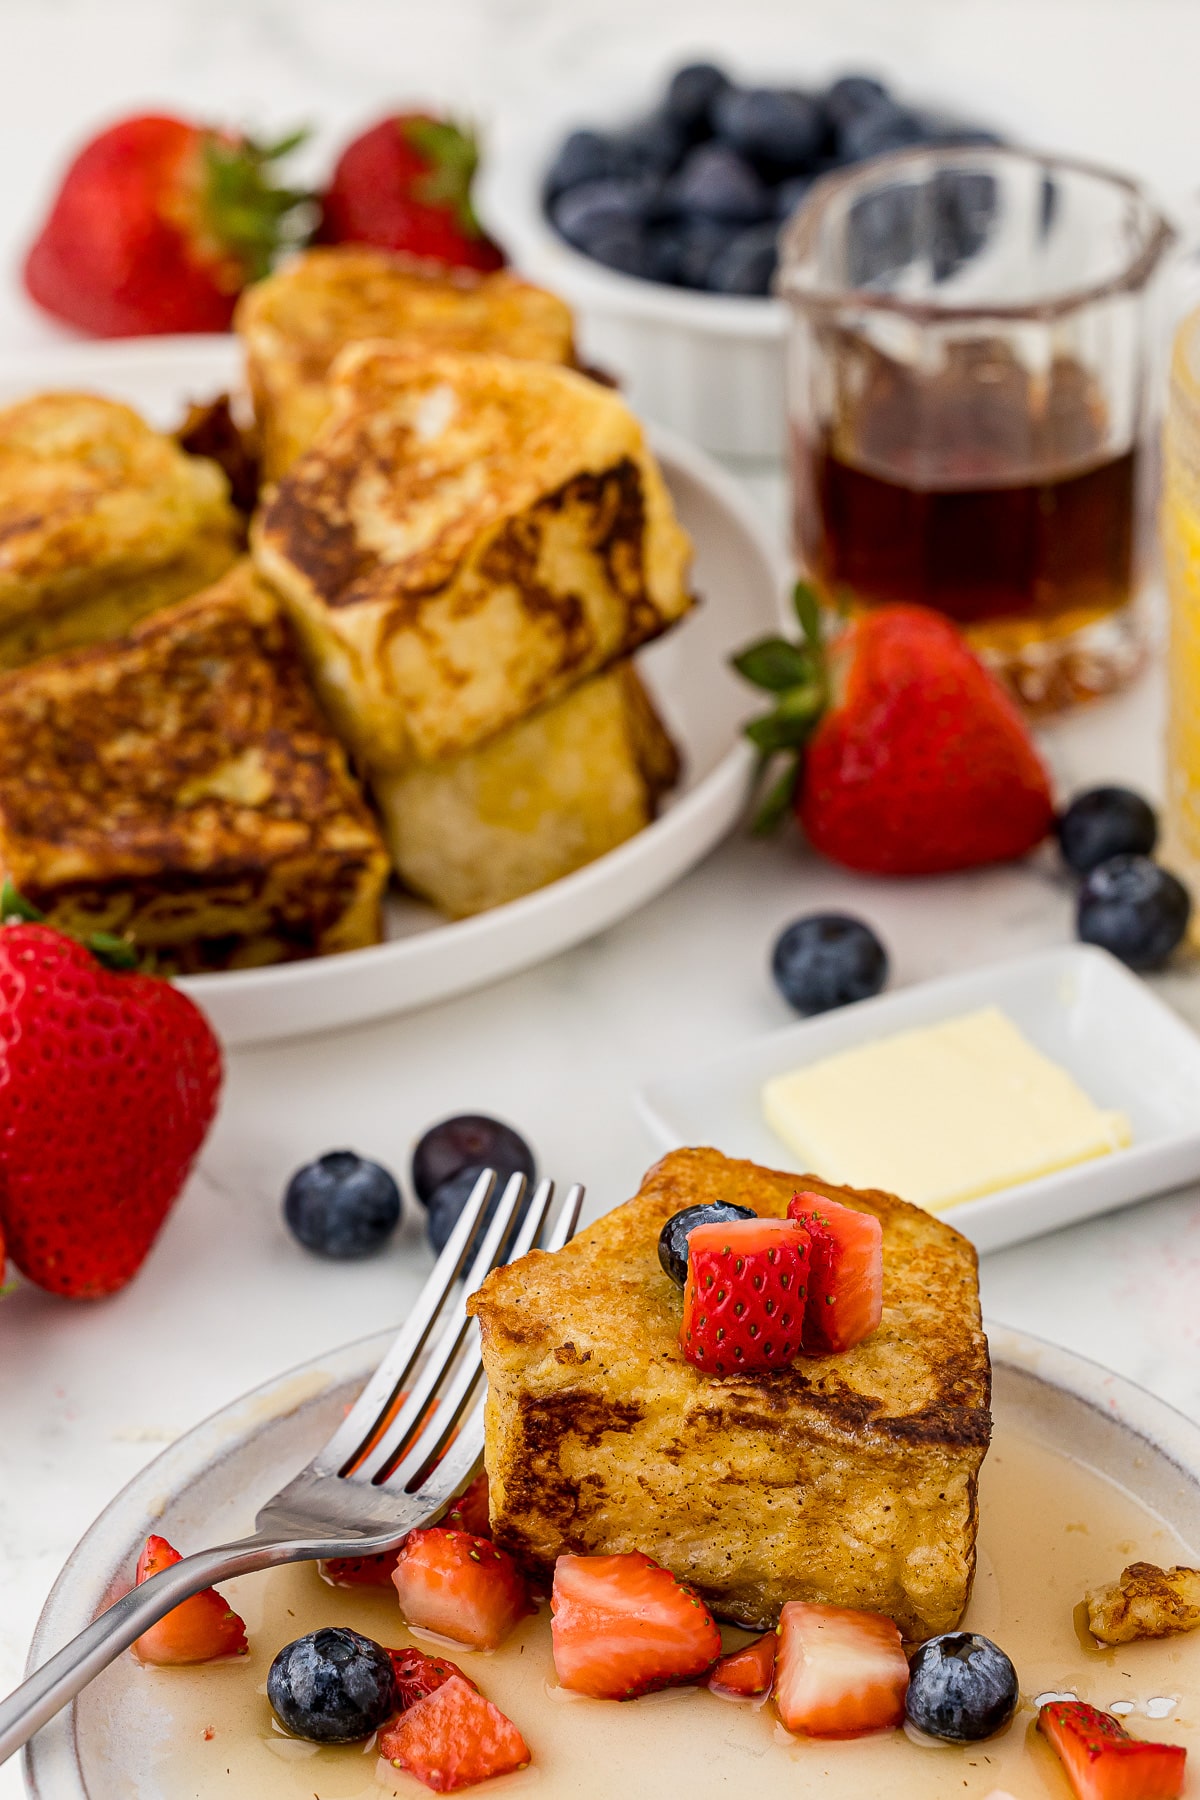 plate of french toast with strawberries, syrup, and blueberries, plaid cloth, a fork, strawberries, blueberries, and syrup in the background with pats of butter